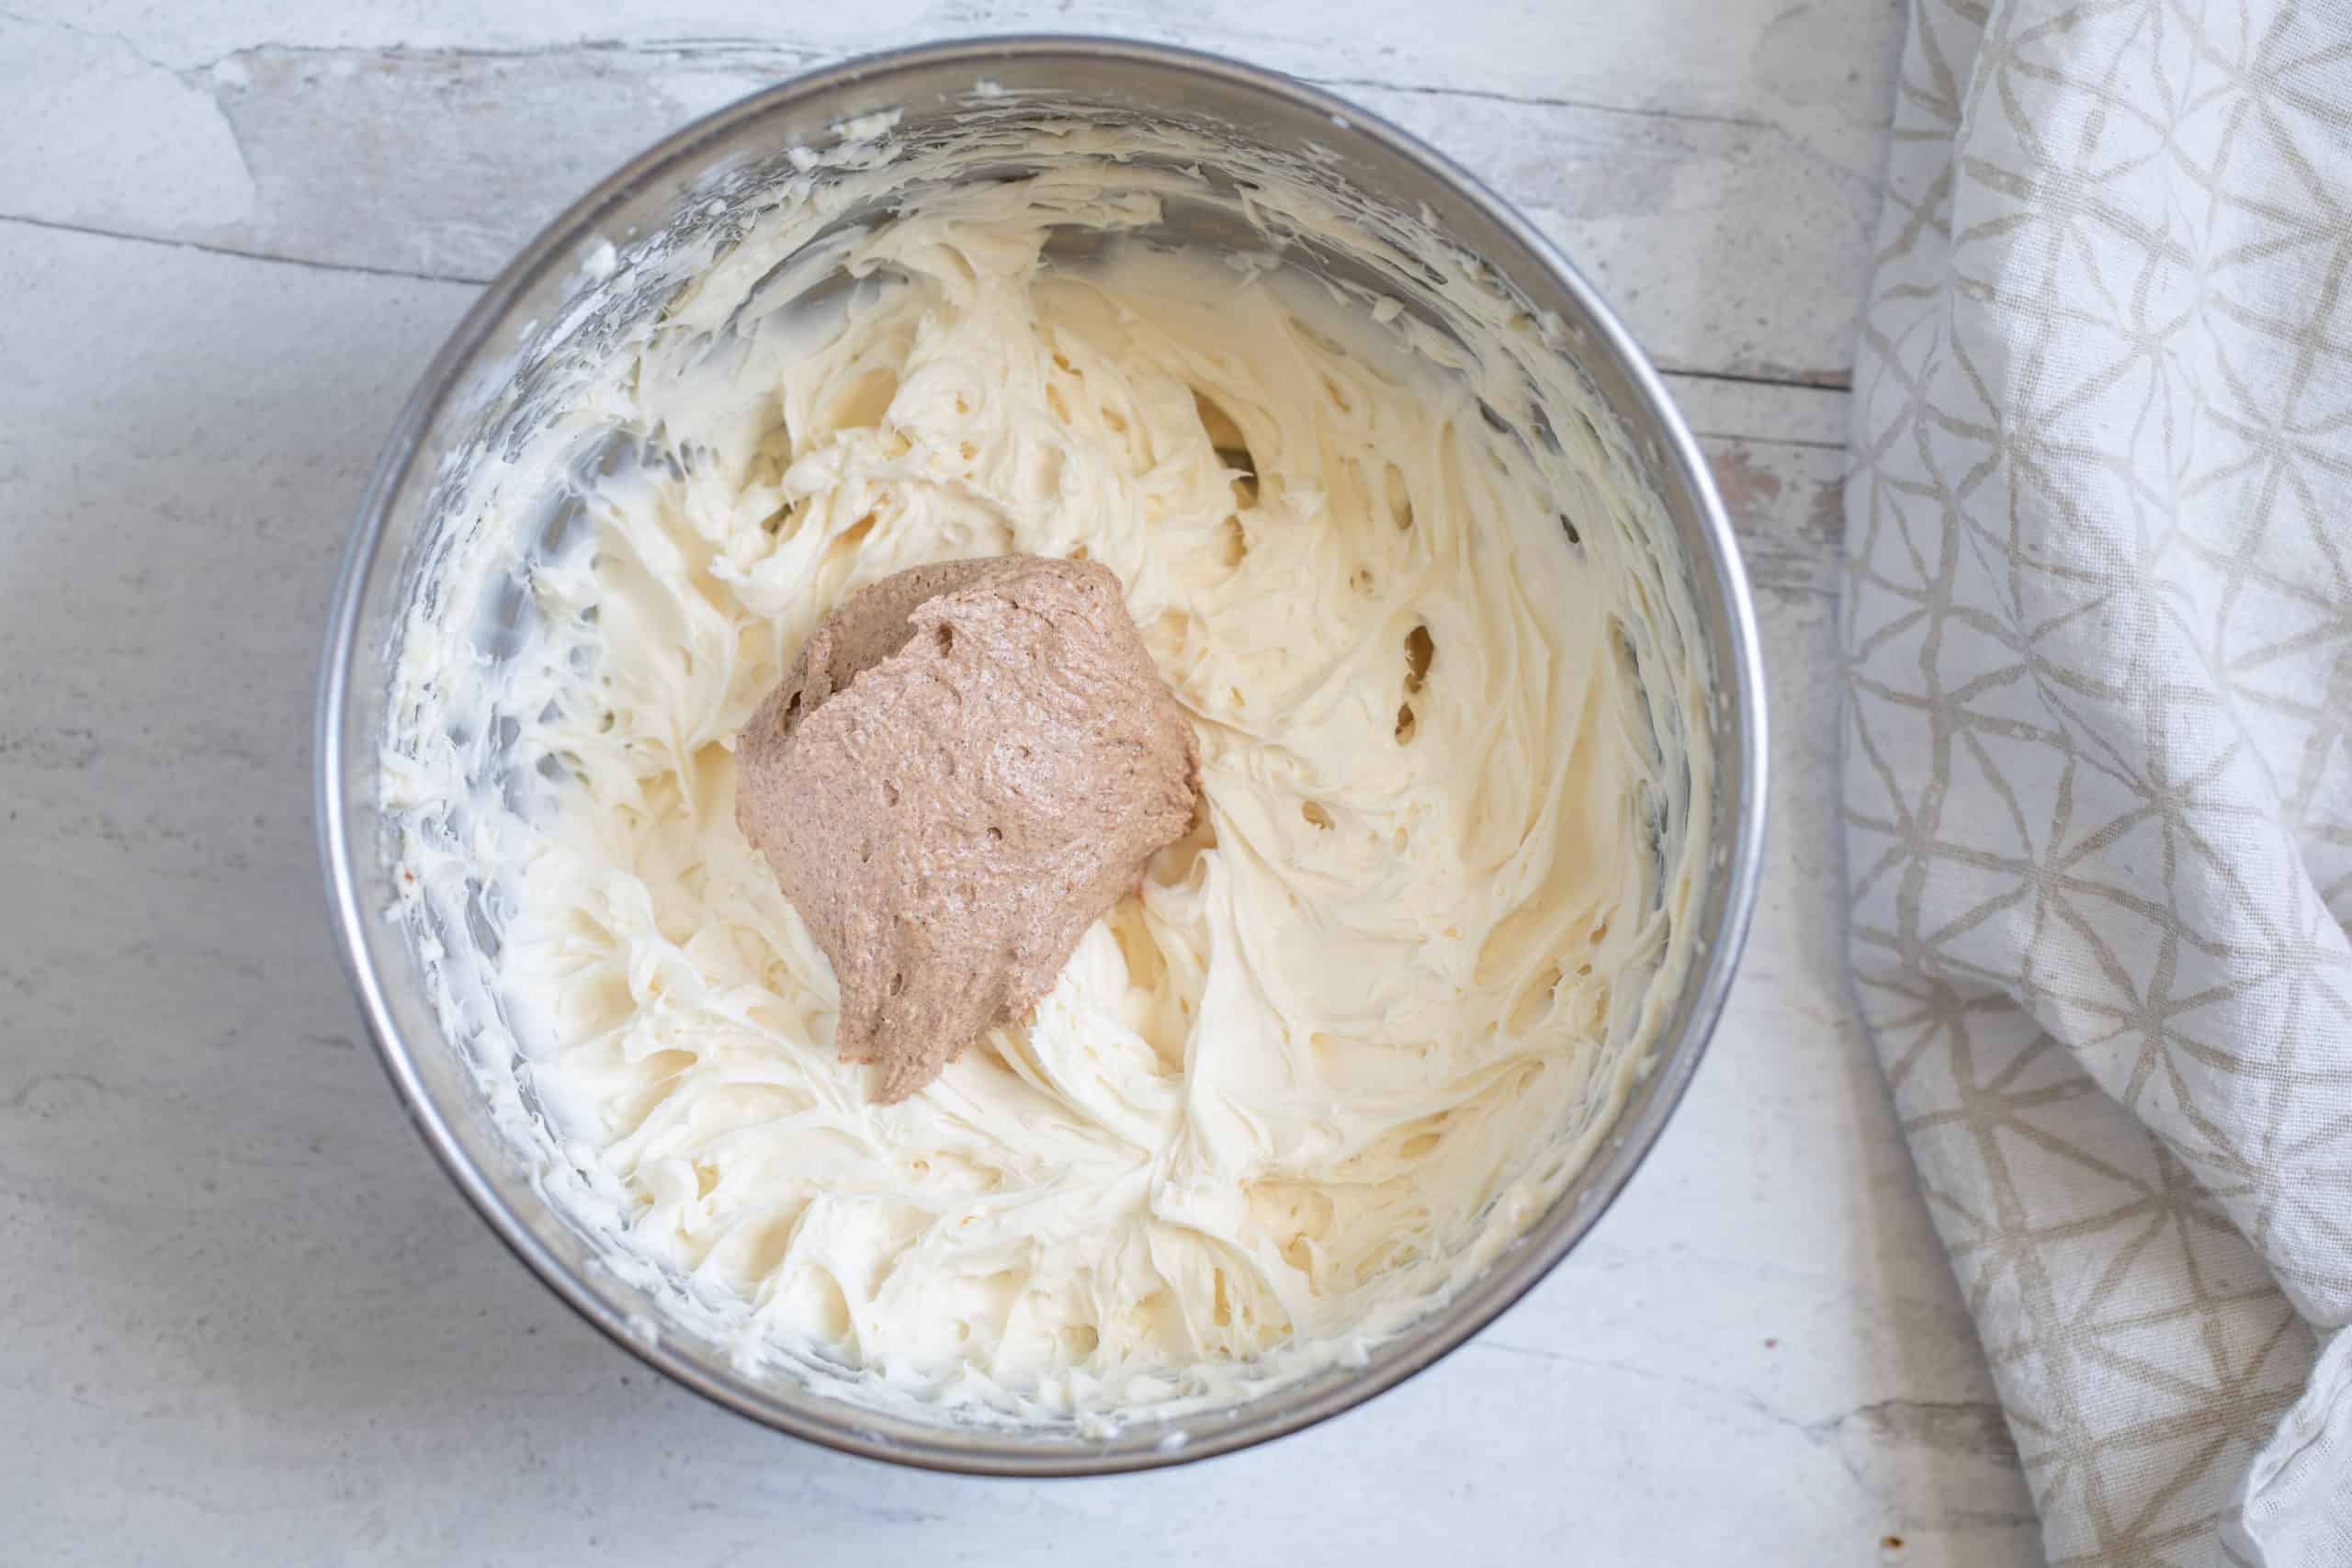 spiced infused cream added to cream cheese mix